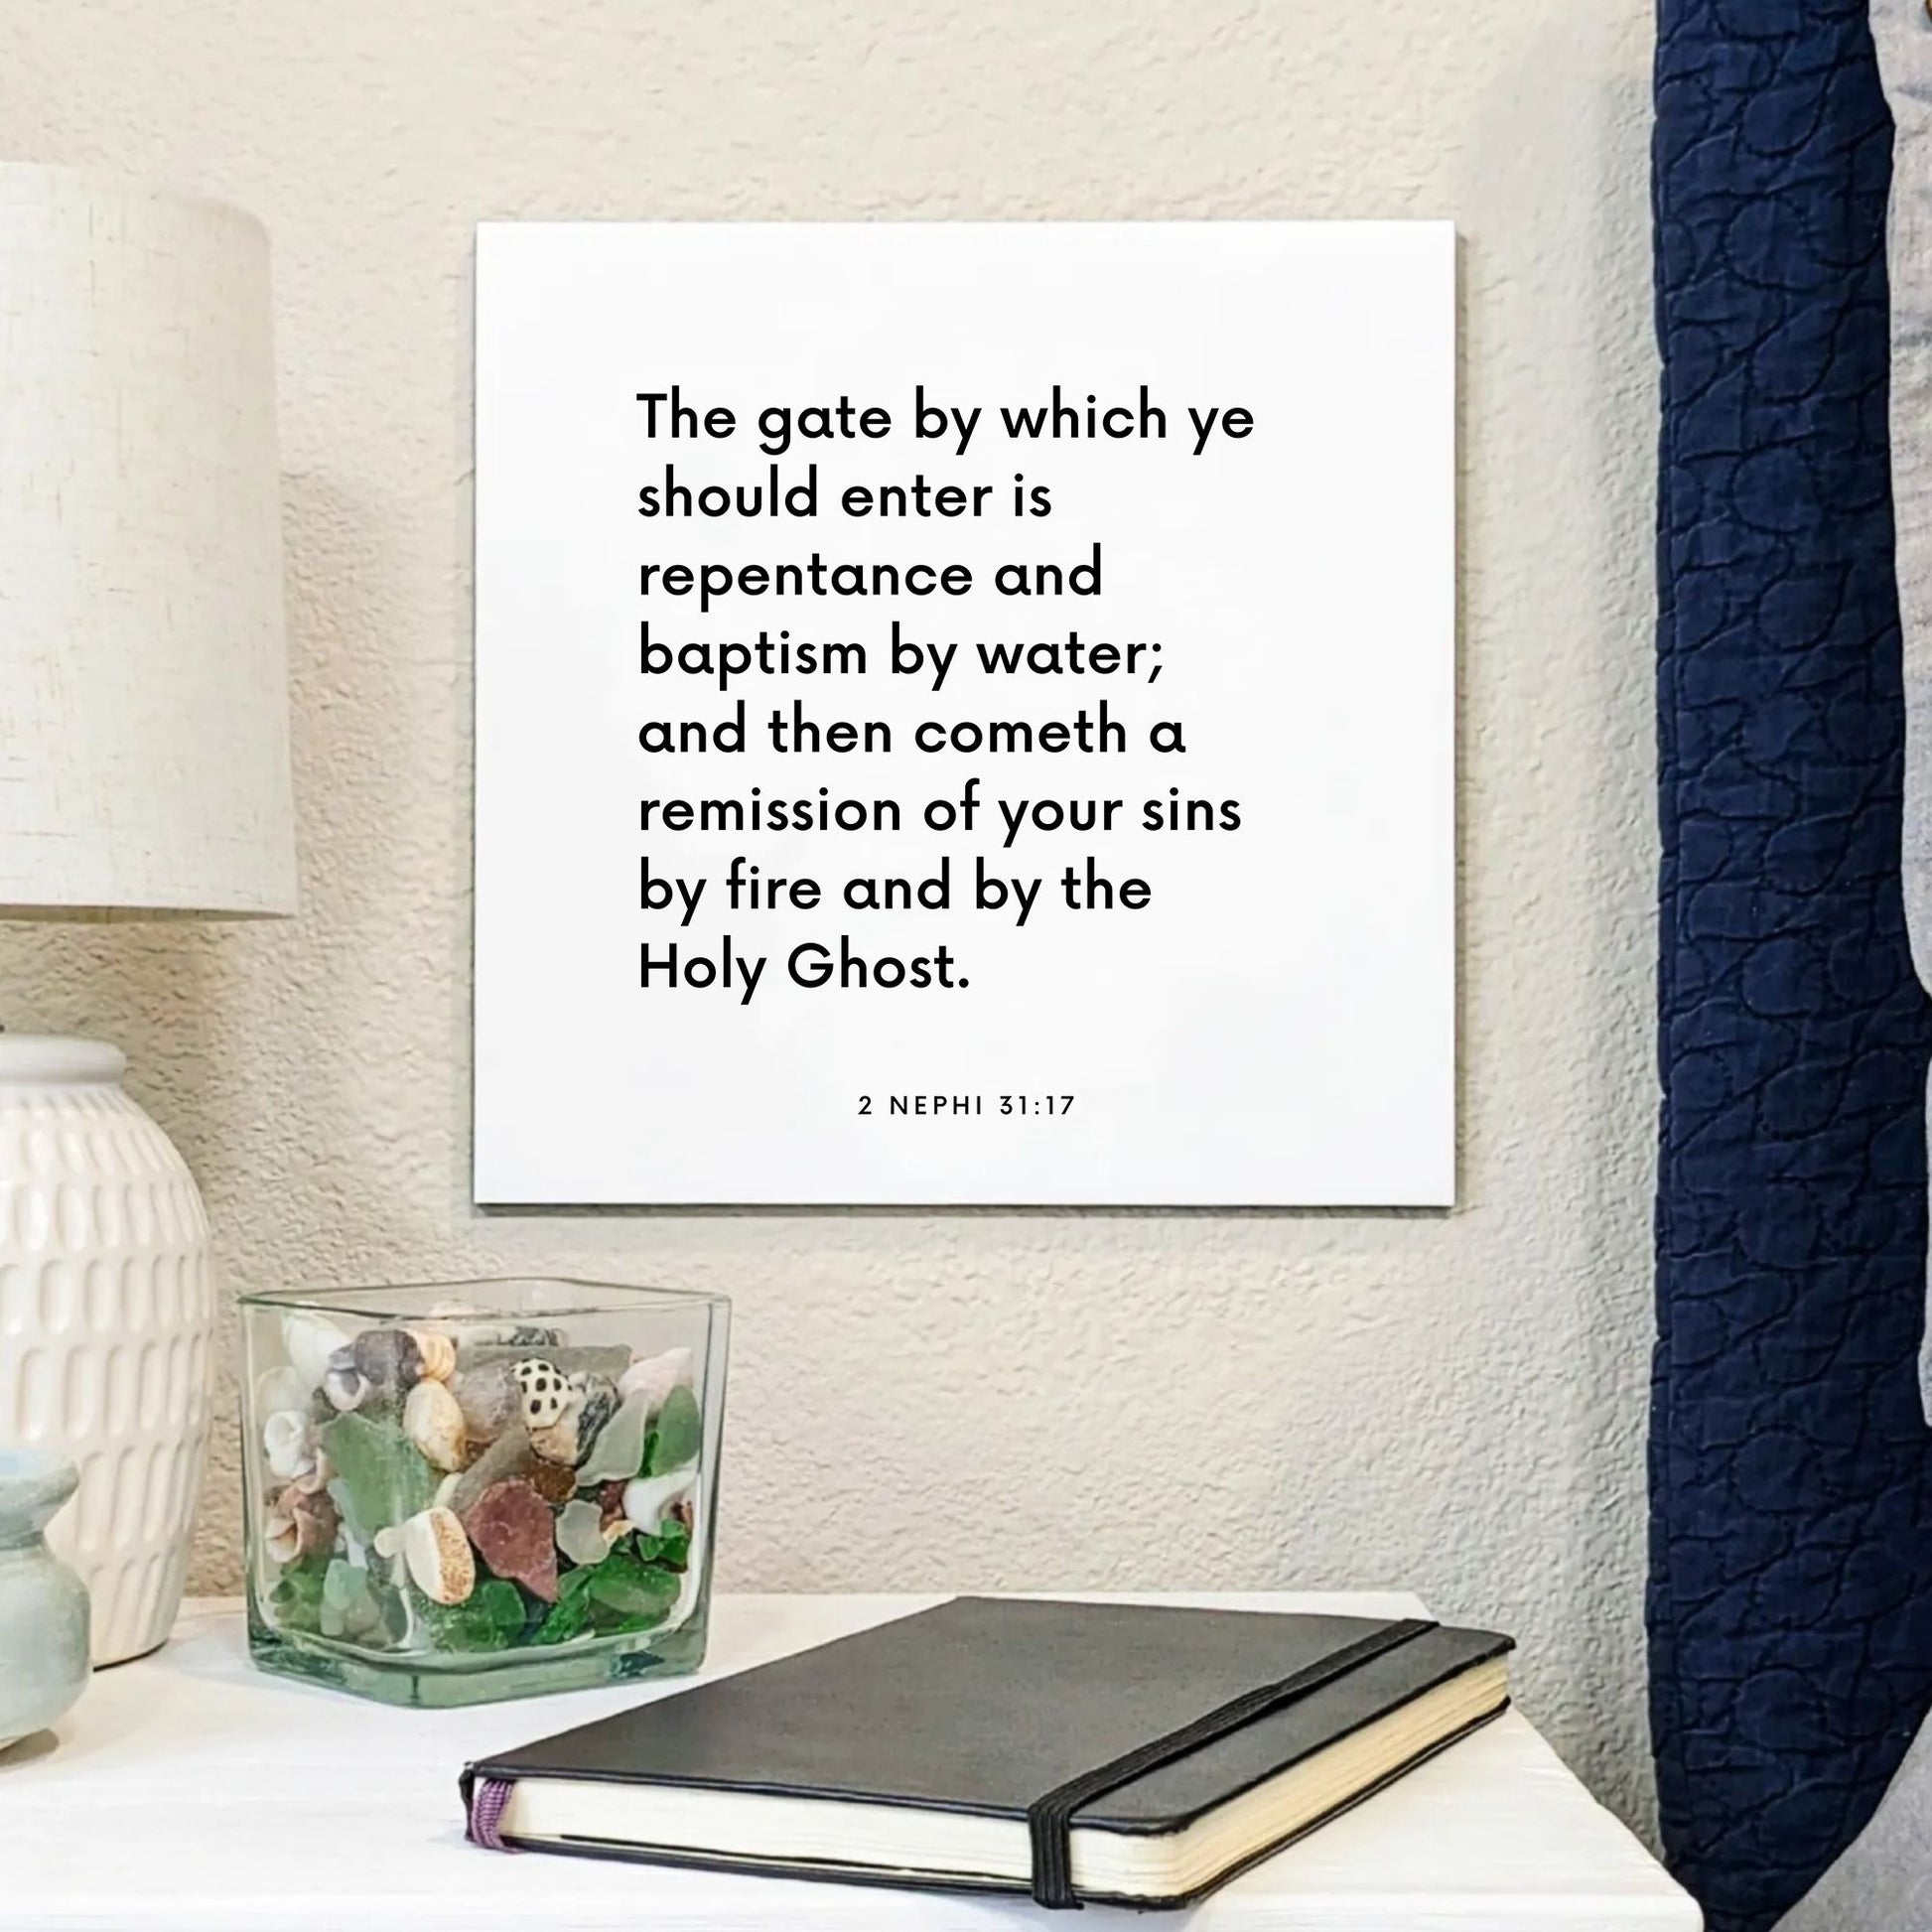 Bedside mouting of the scripture tile for 2 Nephi 31:17 - "The gate by which ye should enter is repentance and baptism"